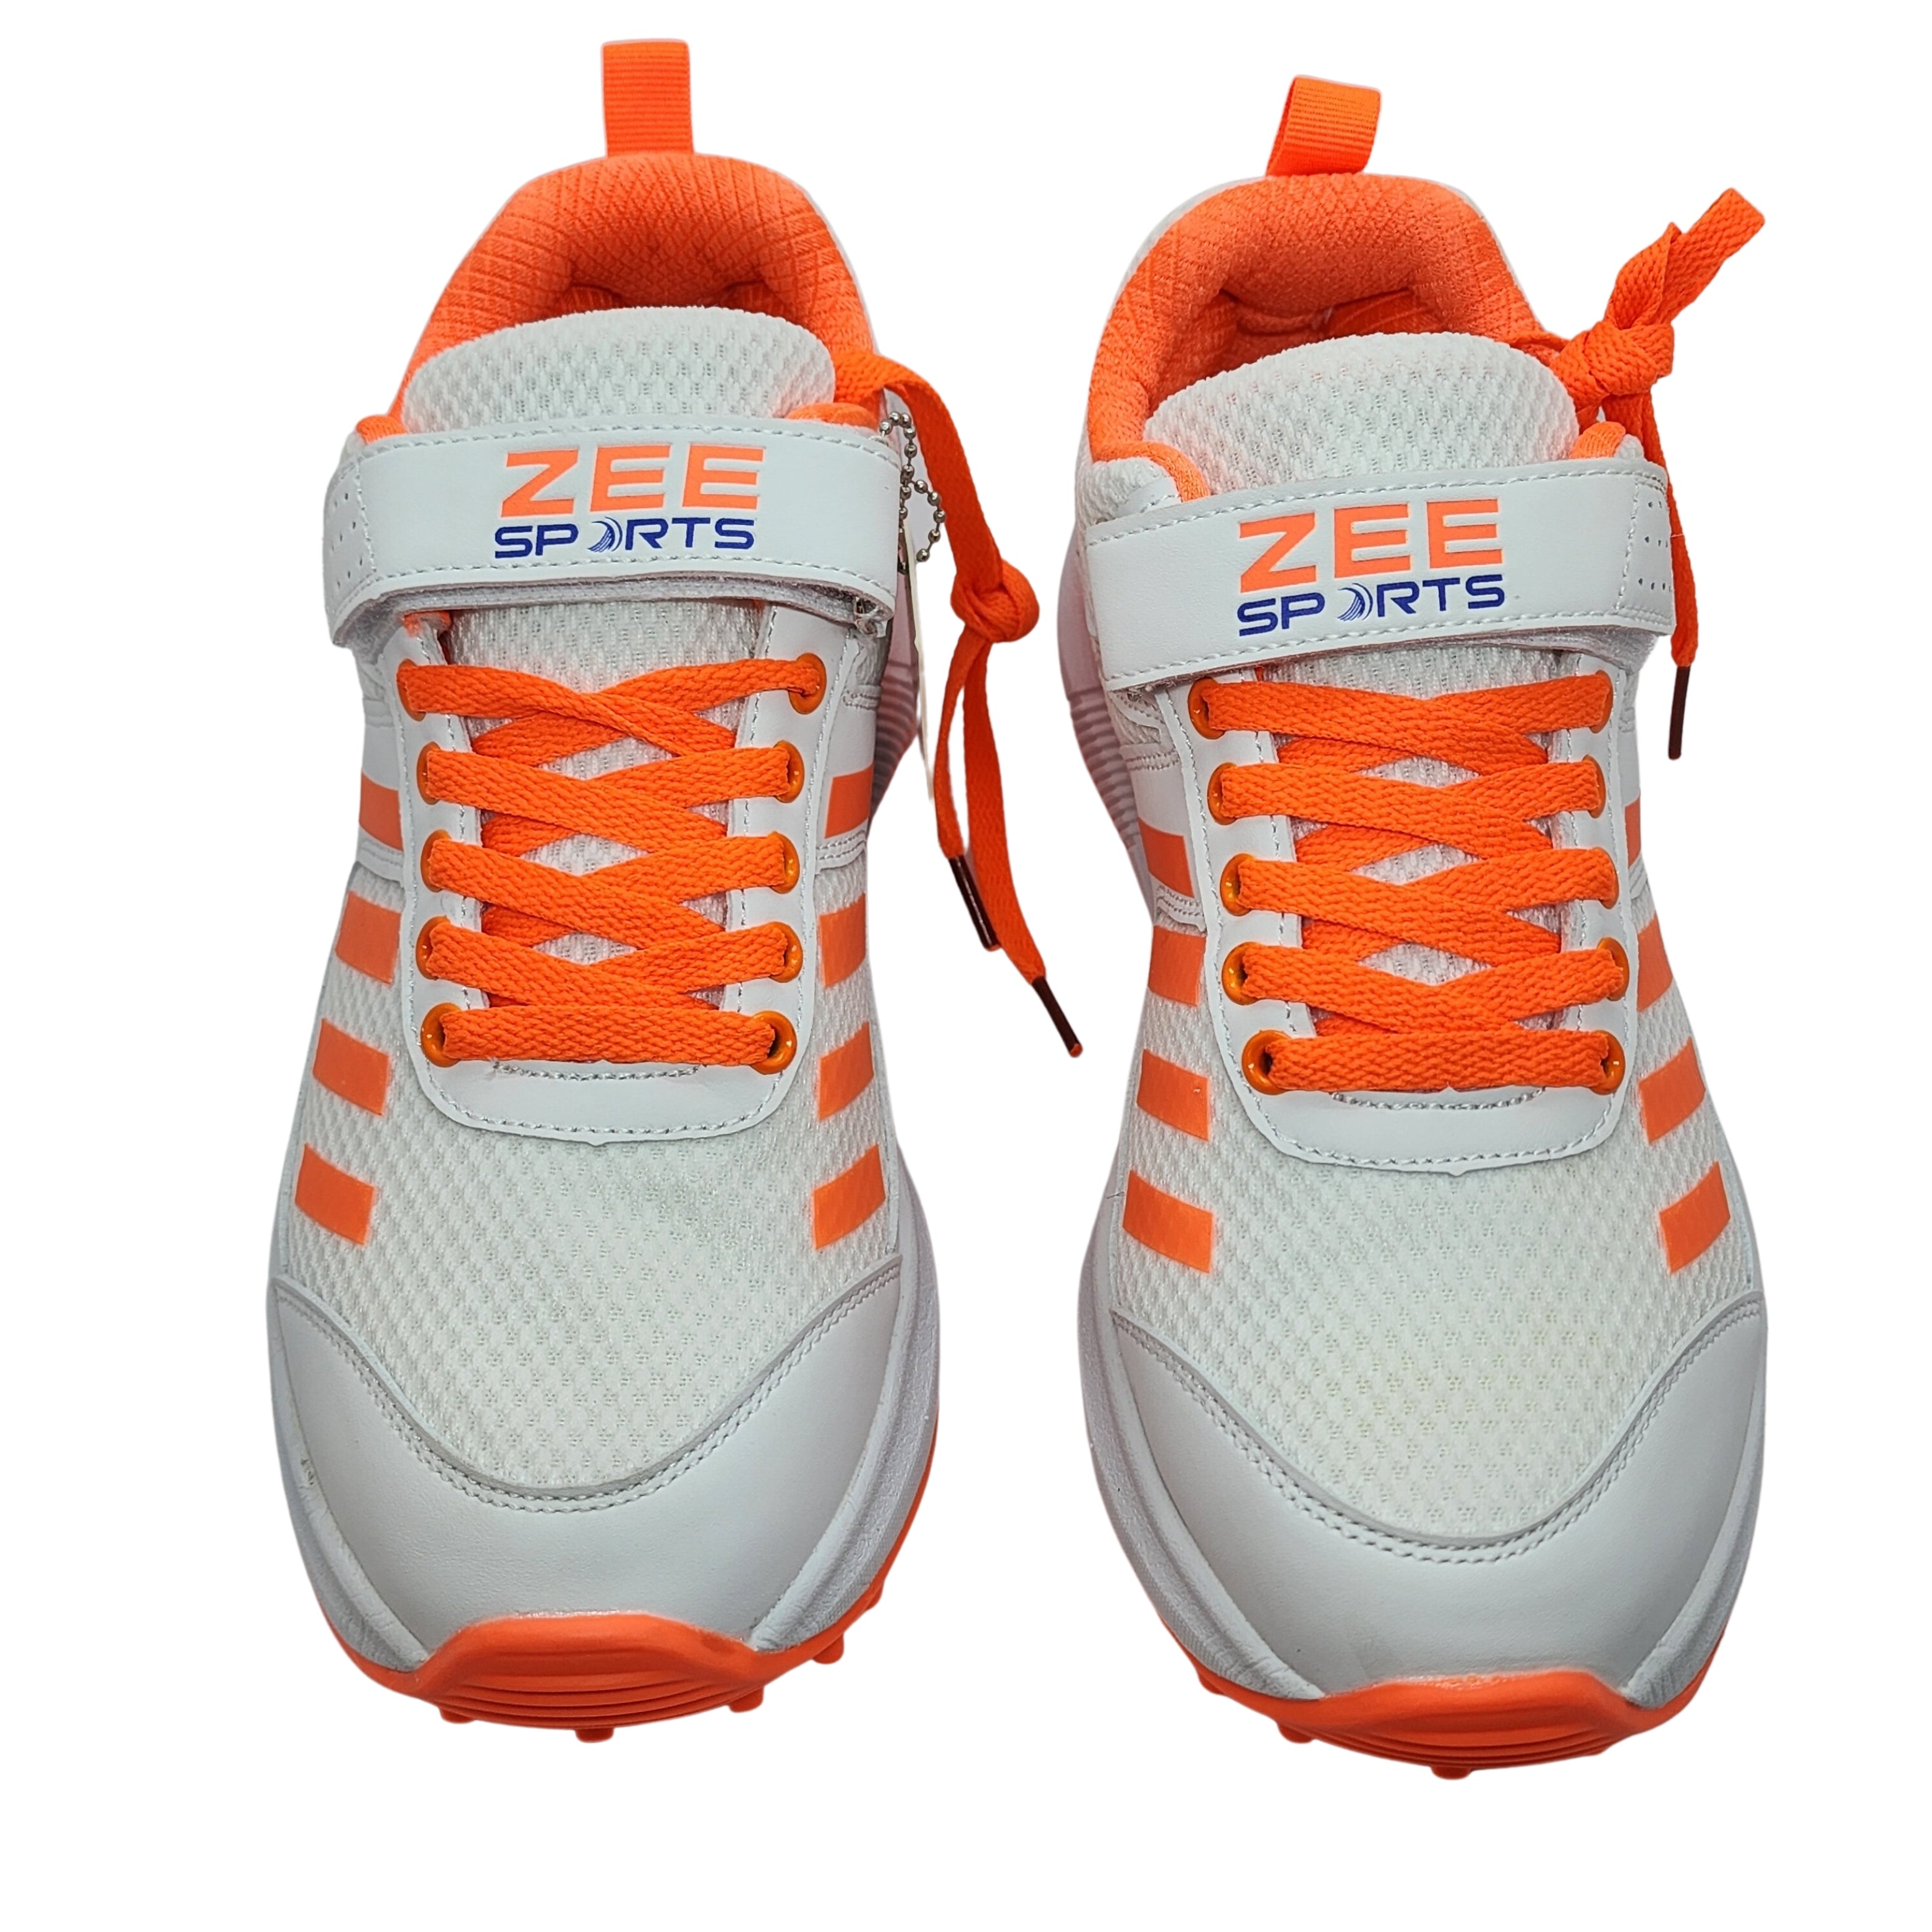 Zee Sports Rubber Spike Allrounder Mid Cricket Shoes With An Extra Gel Non Slip in-sole | Orange Color